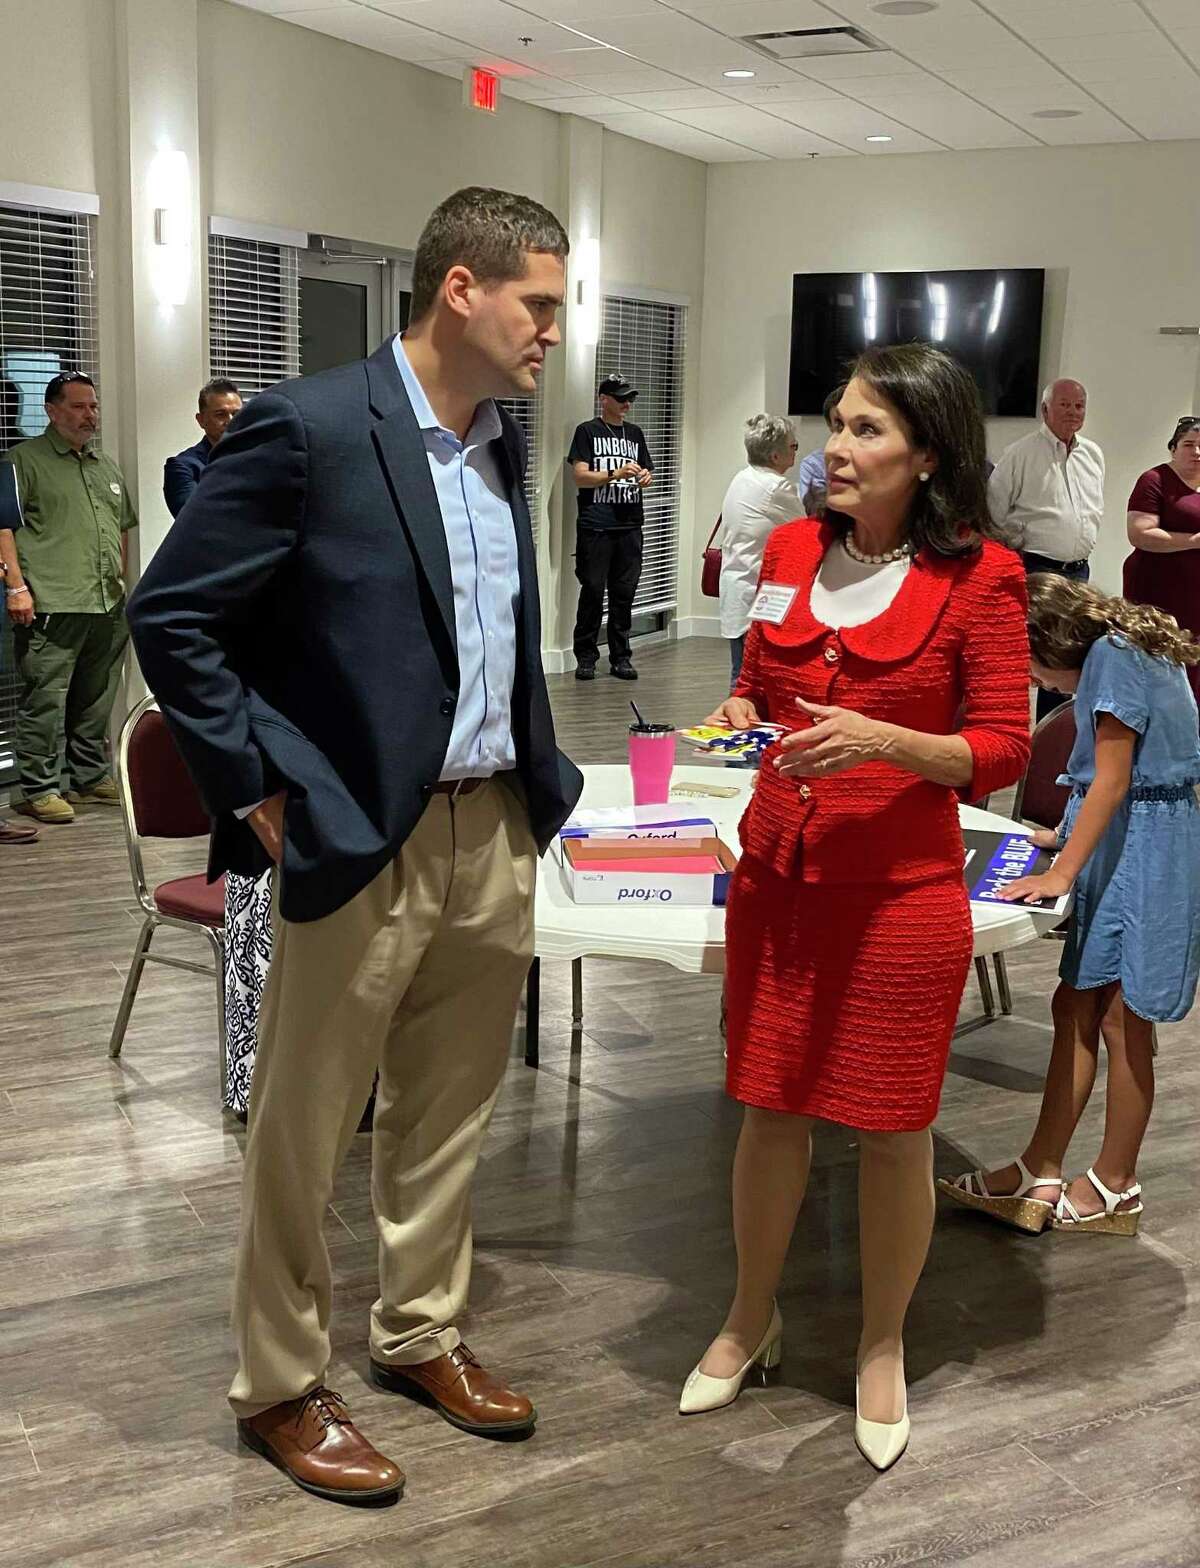 Grant Moody speaks with Marialyn Barnard just before the final results were announced at Thursday's GOP precinct-chair vote to select the party's nominee for Bexar County commissioner. Moody defeated Barnard for the nomination